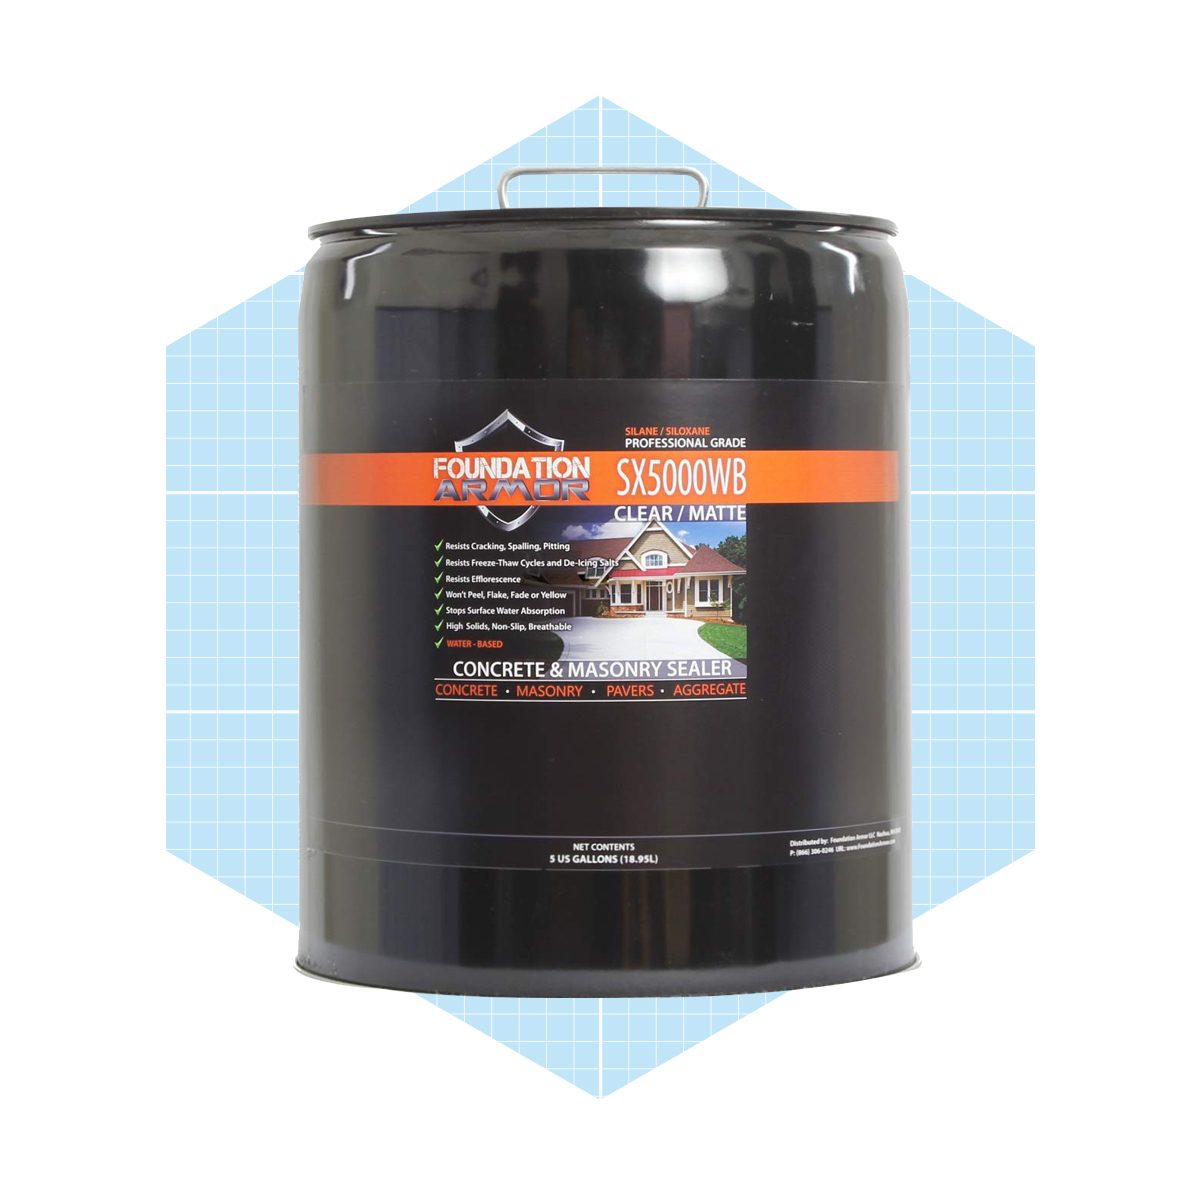 5 Gal. Approved Water Based Silane Siloxane Penetrating Concrete Sealer Ecomm Amazon.com